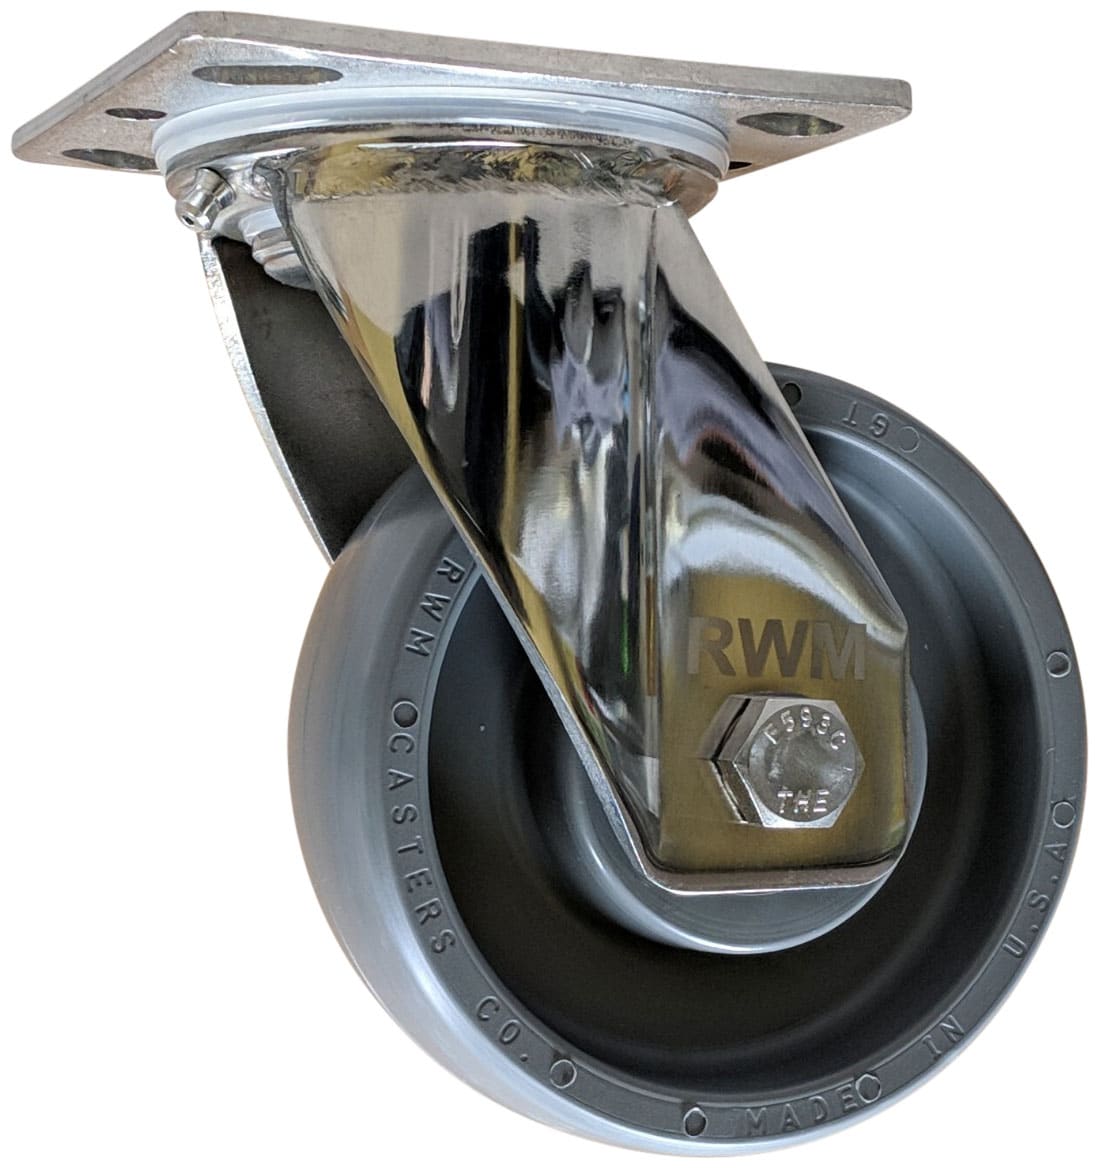 S45 Stainless Steel Casters